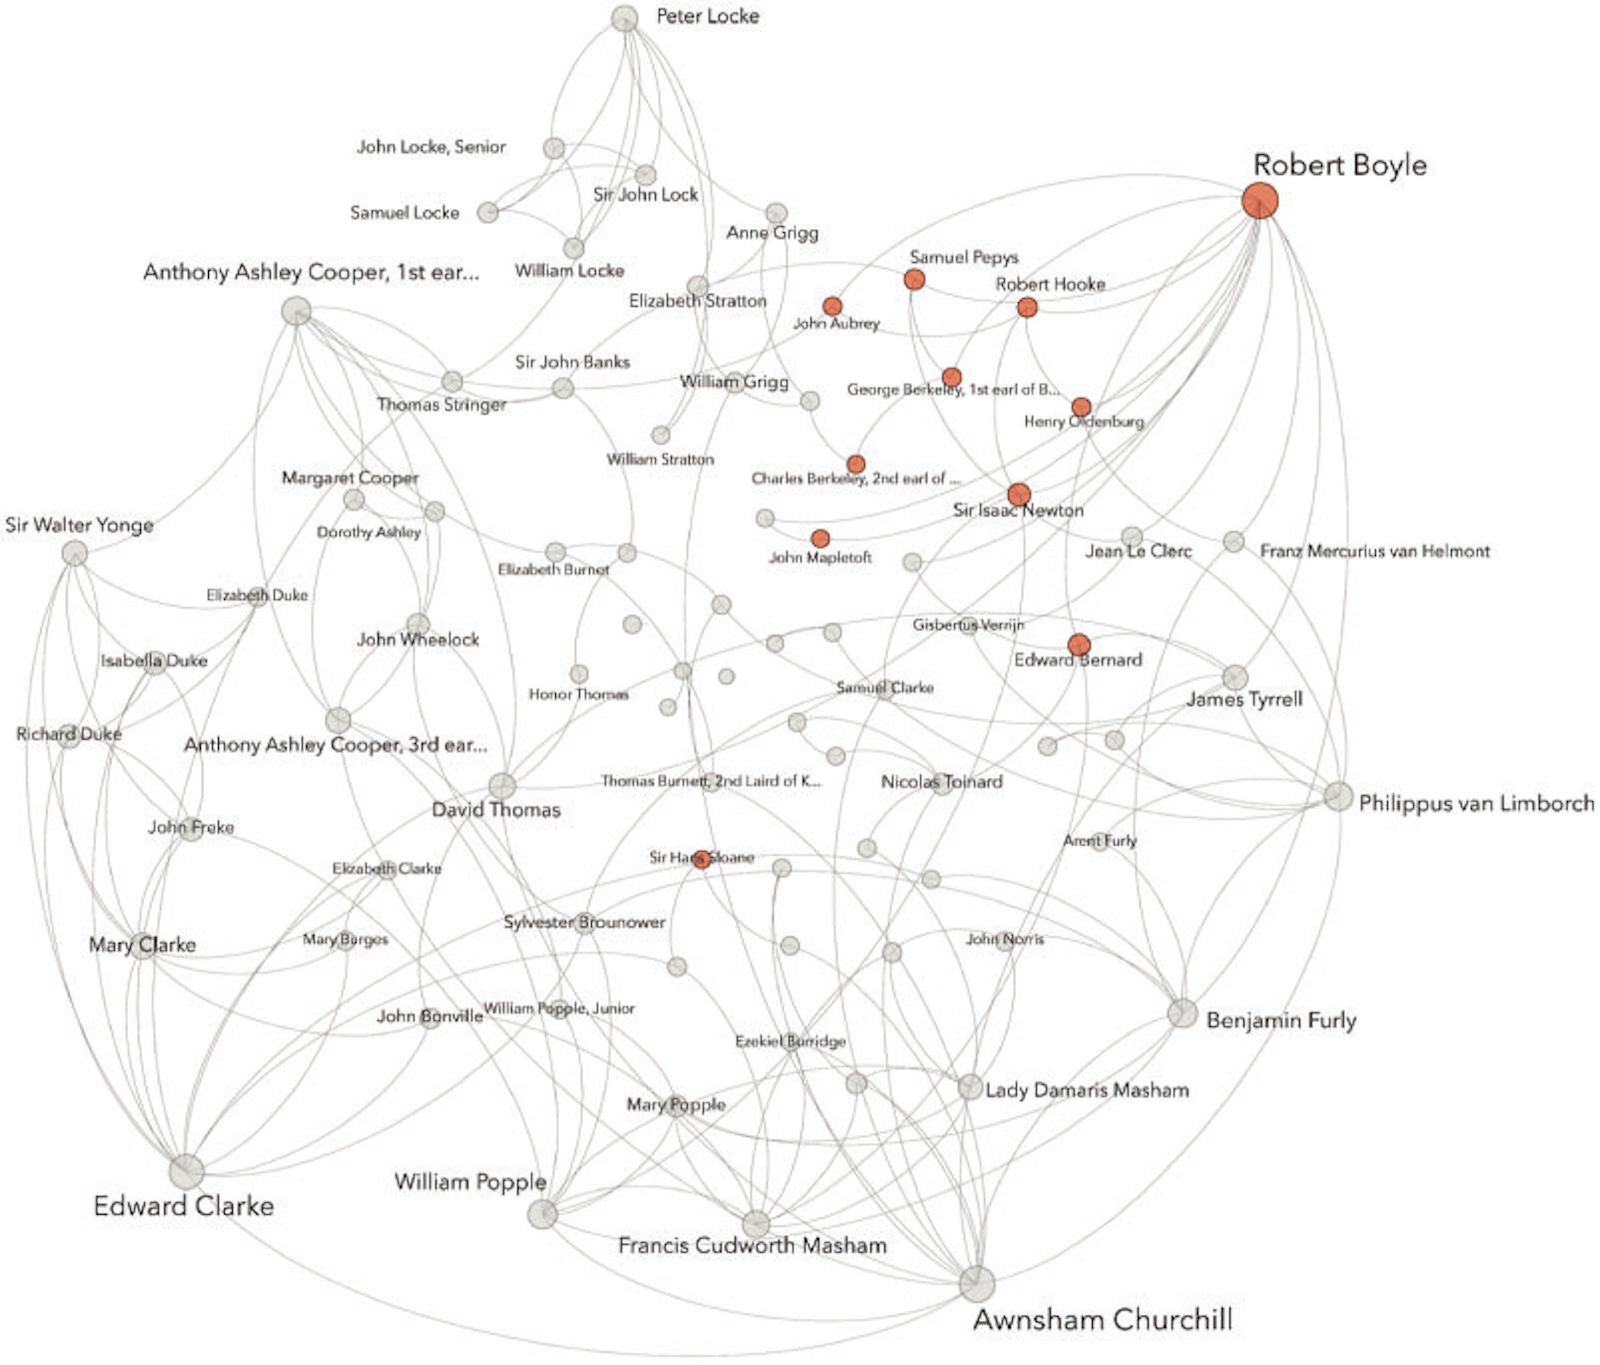 Network diagram of philosophers and scientists with robert boyle as a central node, connected by lines representing relationships and influence, labeled with various names.